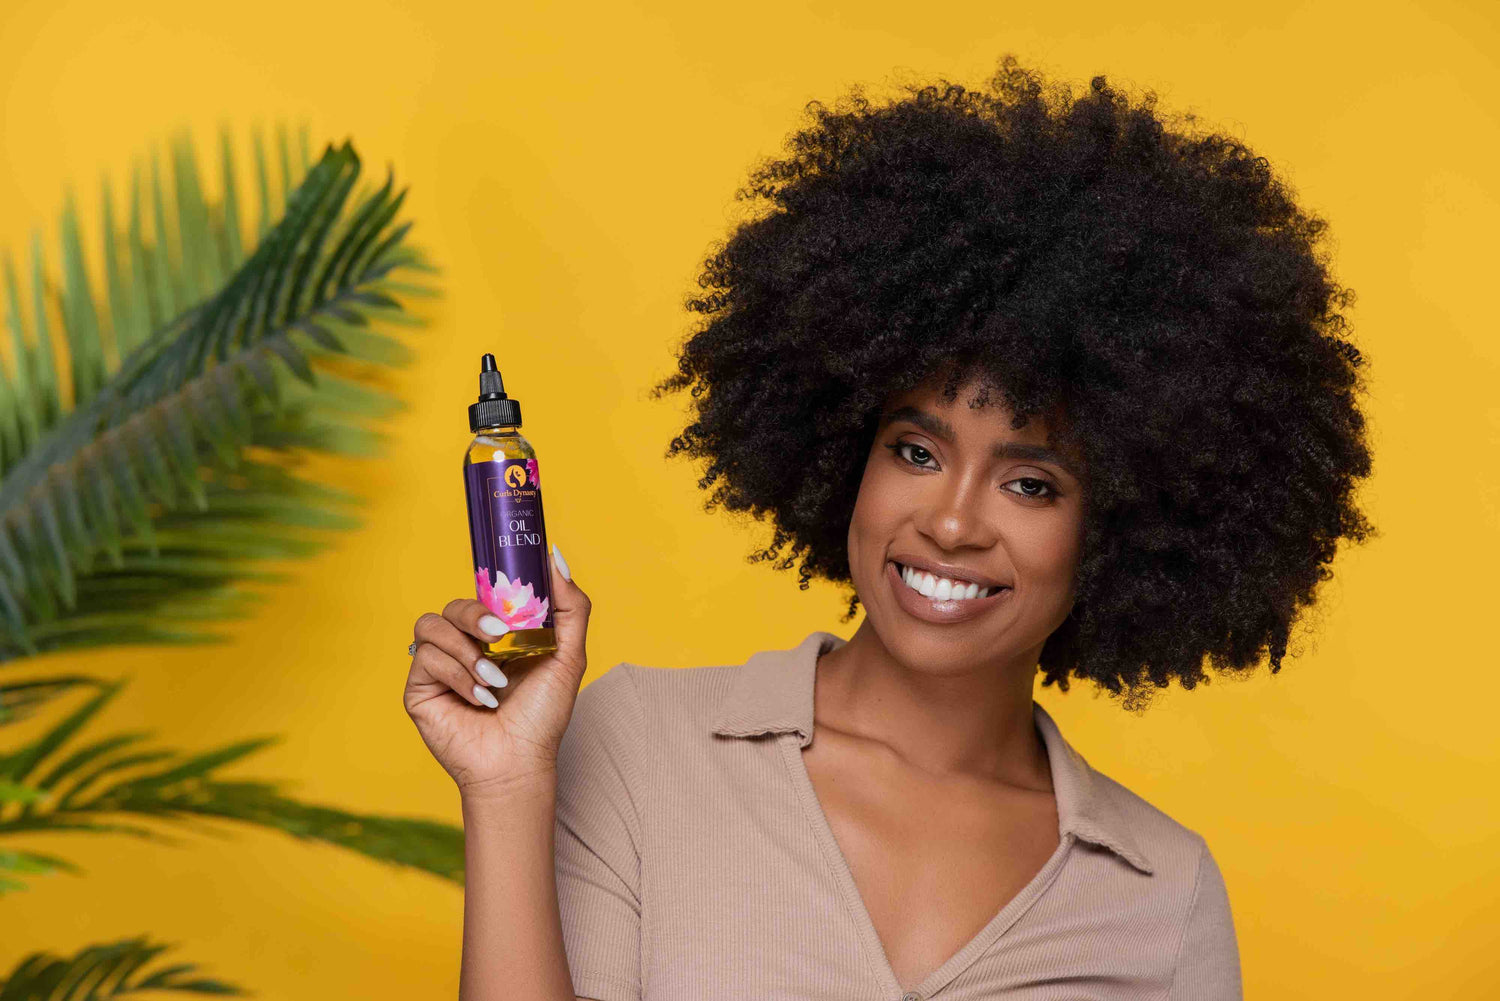 A woman smiling while holding a bottle of organic Oil Blend hair product.